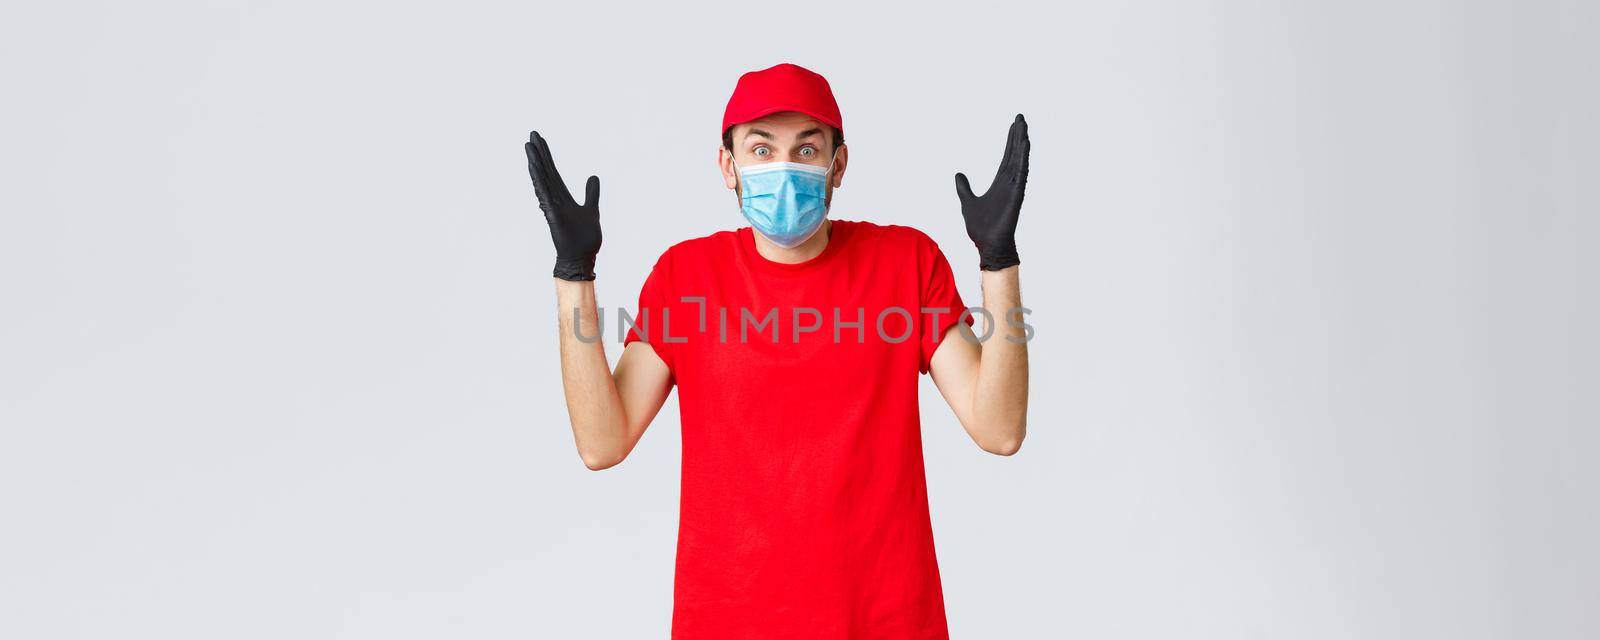 Covid-19, self-quarantine, online shopping and shipping concept. Surprised and confused delivery guy in medical mask, gloves and re duniform, shrugging, cant understand how it happened.